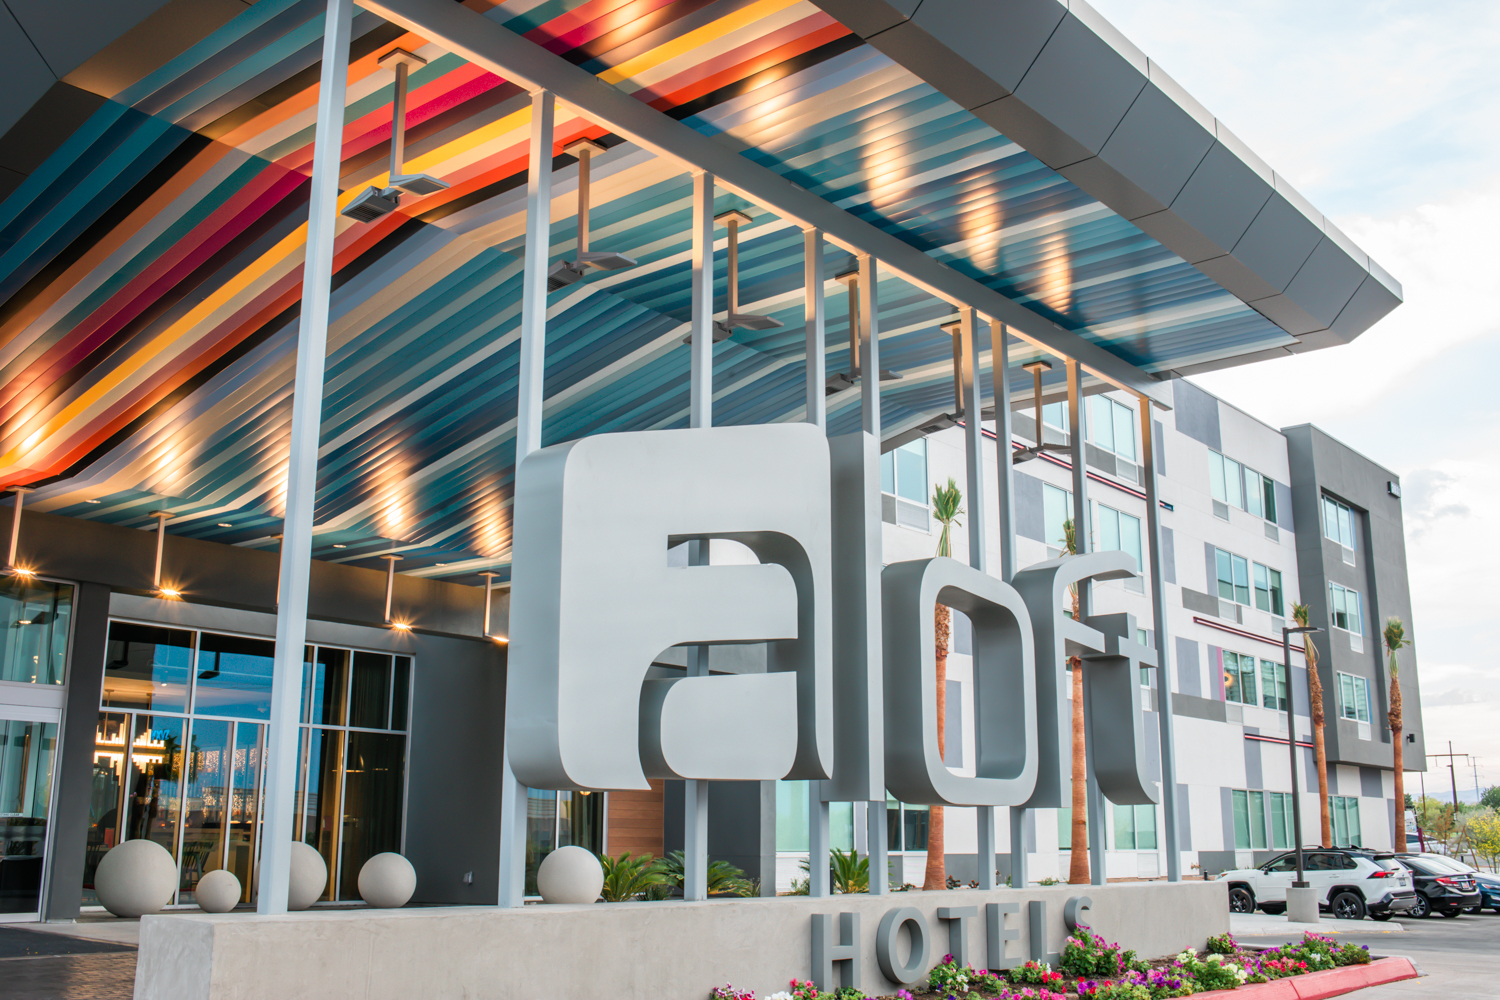 Aloft Hotel 2023 – Commercial Glass Project